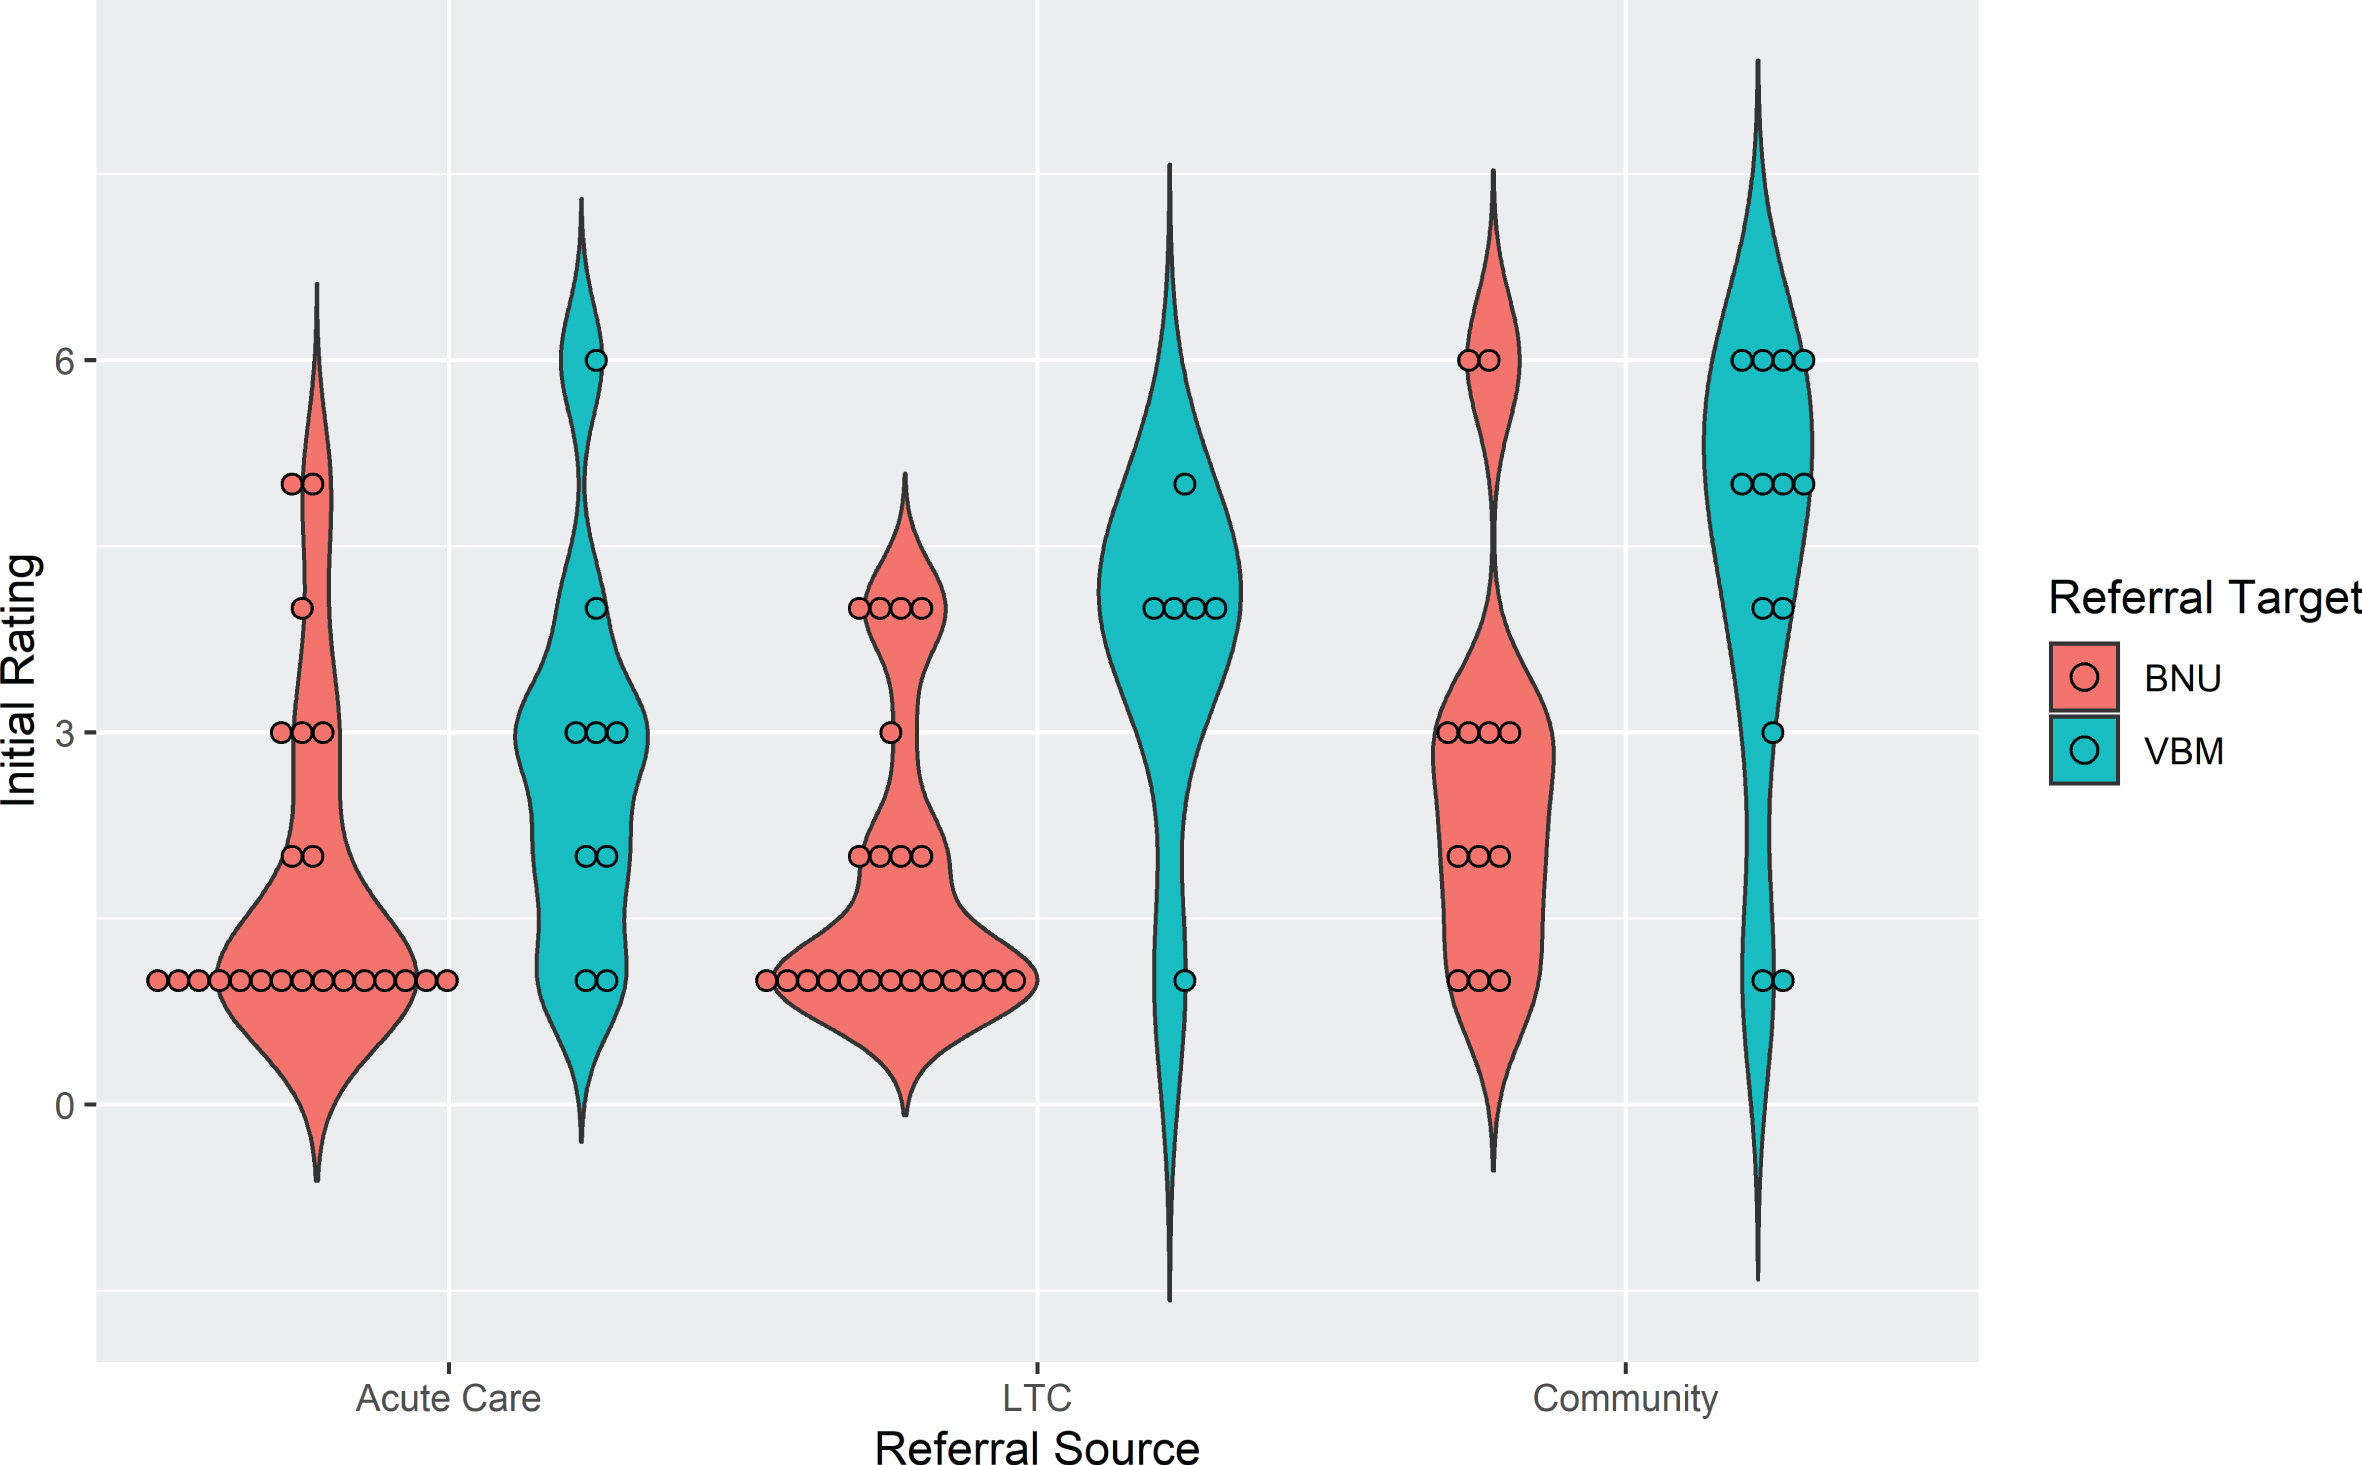 Violin plot showing initial rating by referral source and referral target for patients admitted to VBM (n = 85).